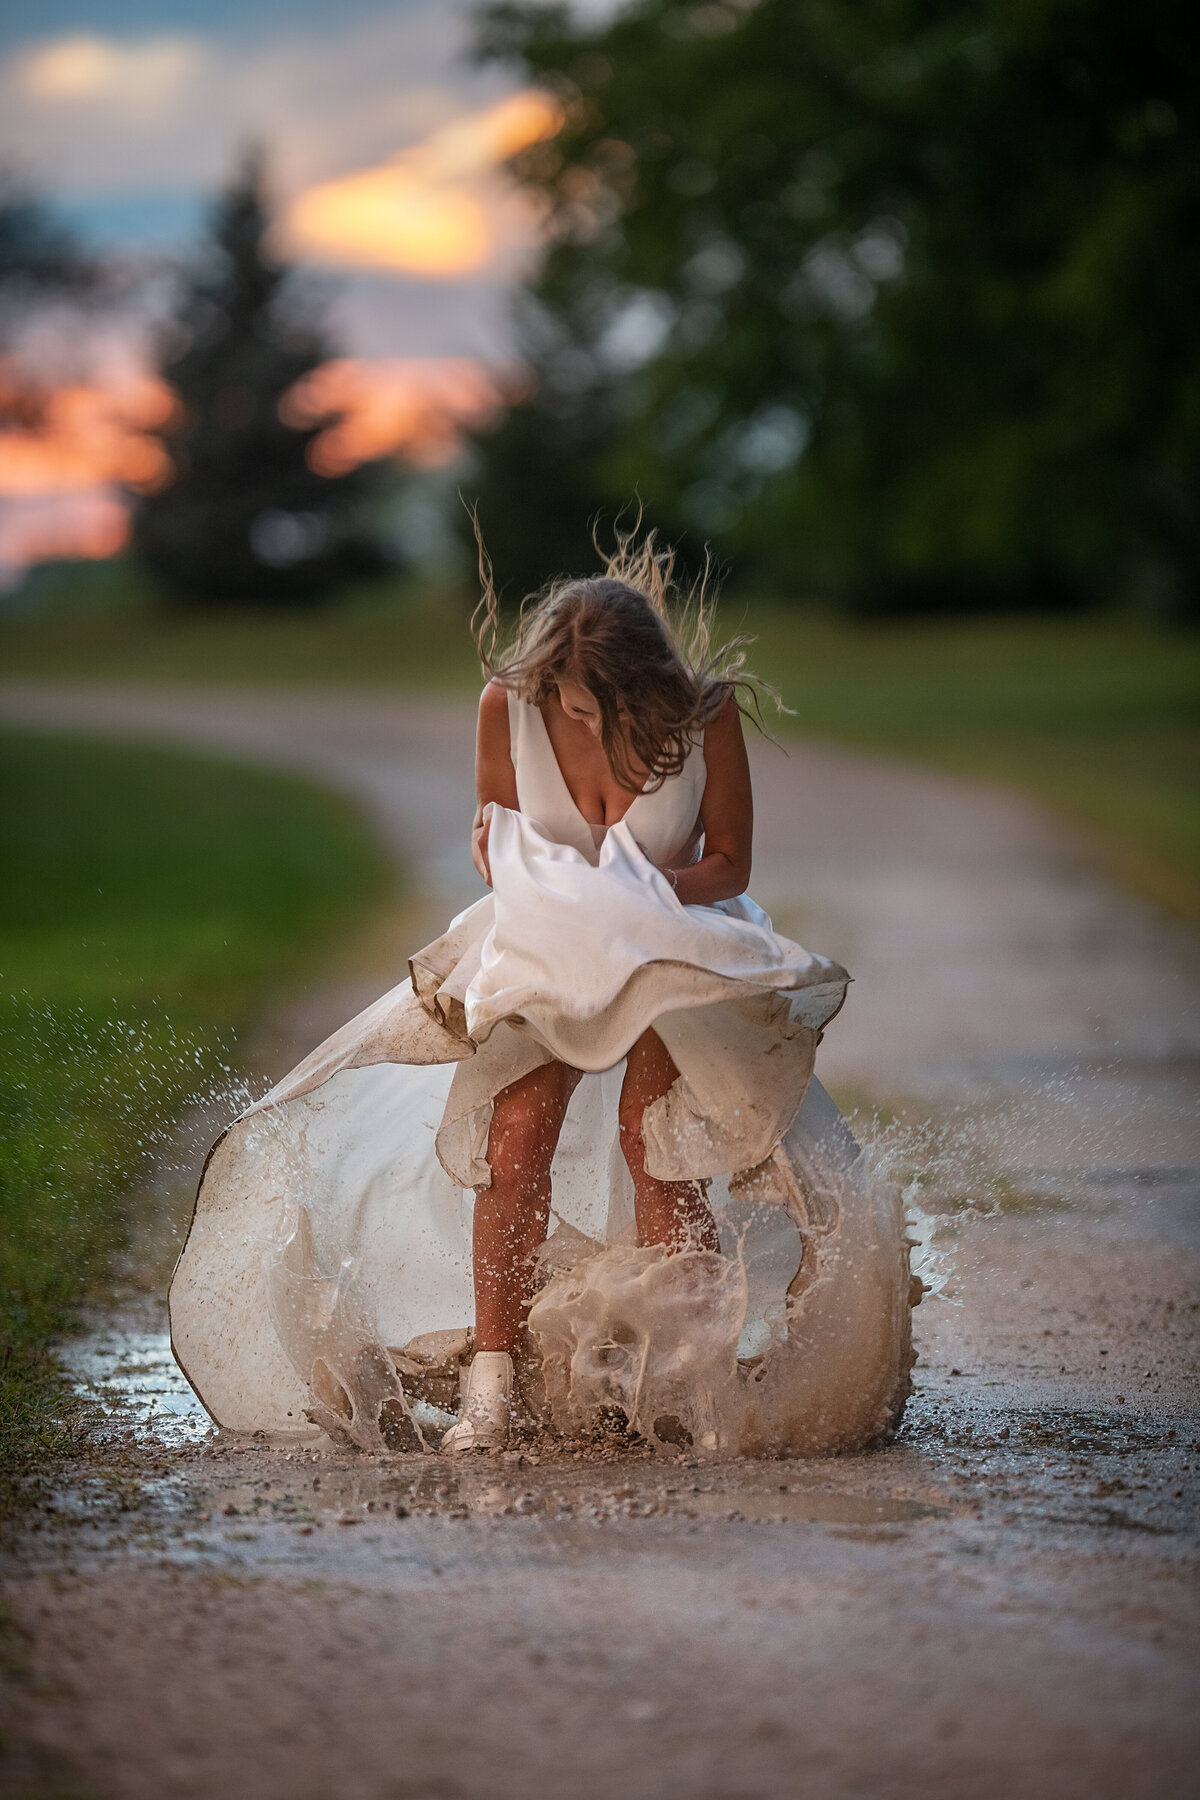 Bride is splashing in a muddy puddle with a white wedding dress during her rainy wedding day